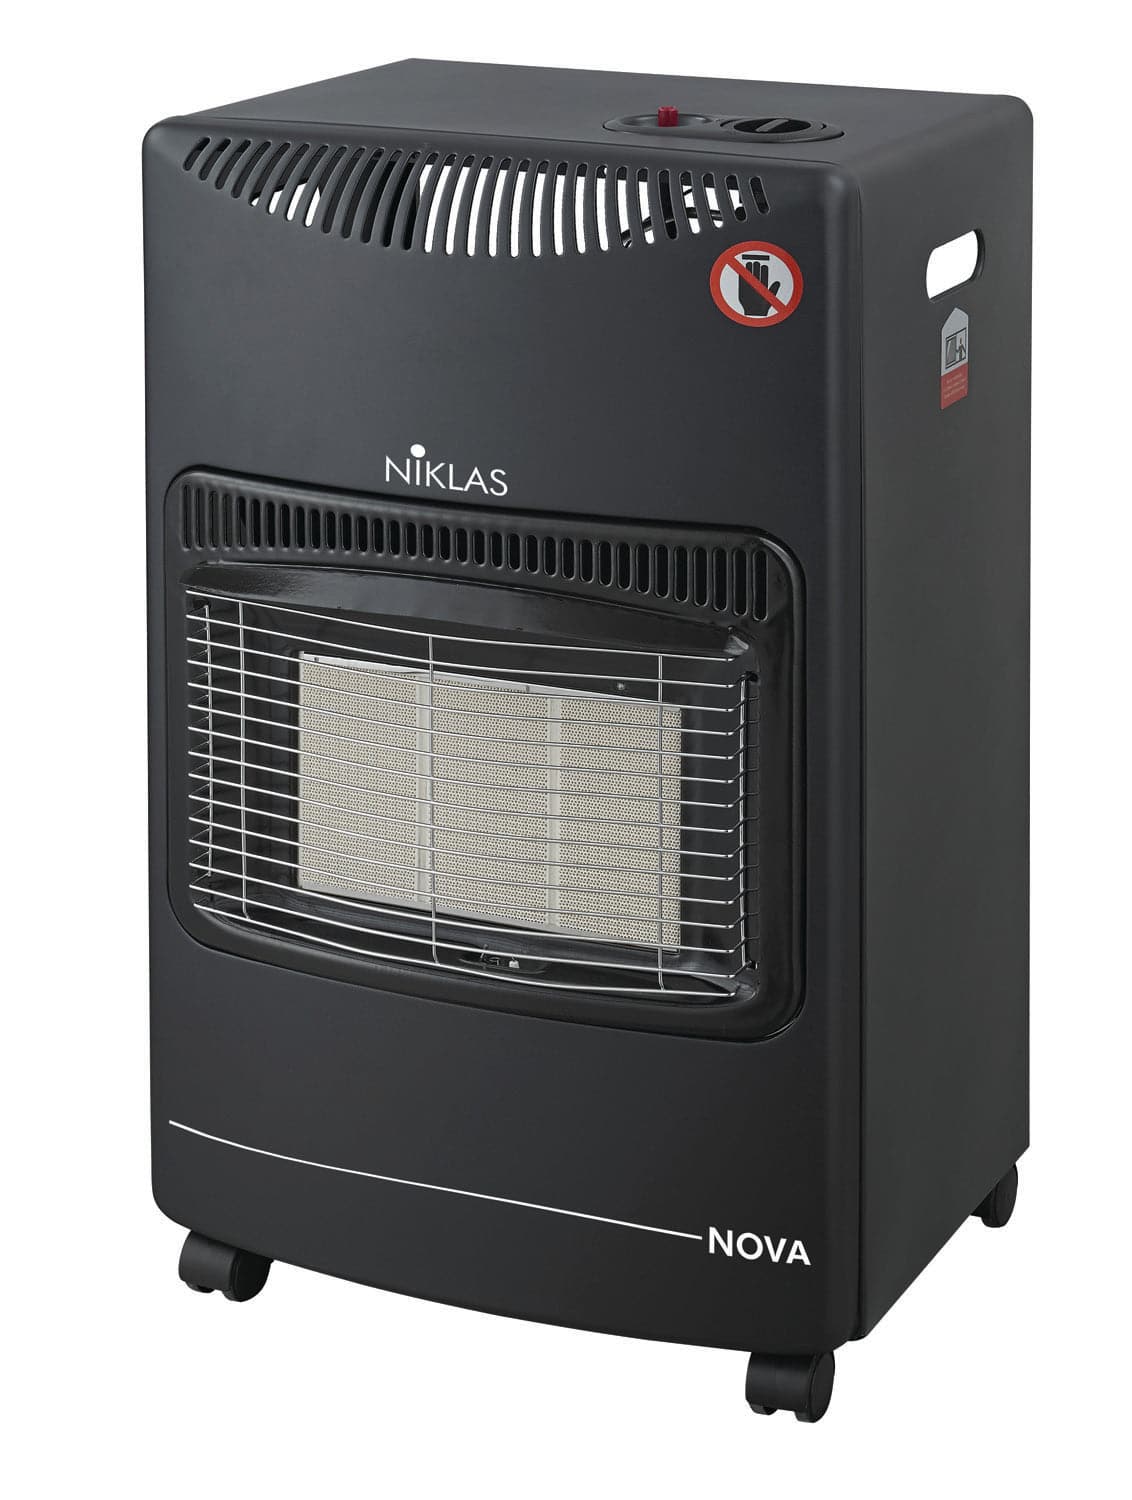 NIKLAS NOVA 4200W INFRARED GAS STOVE, PIPE AND VALVE EXCLUDED